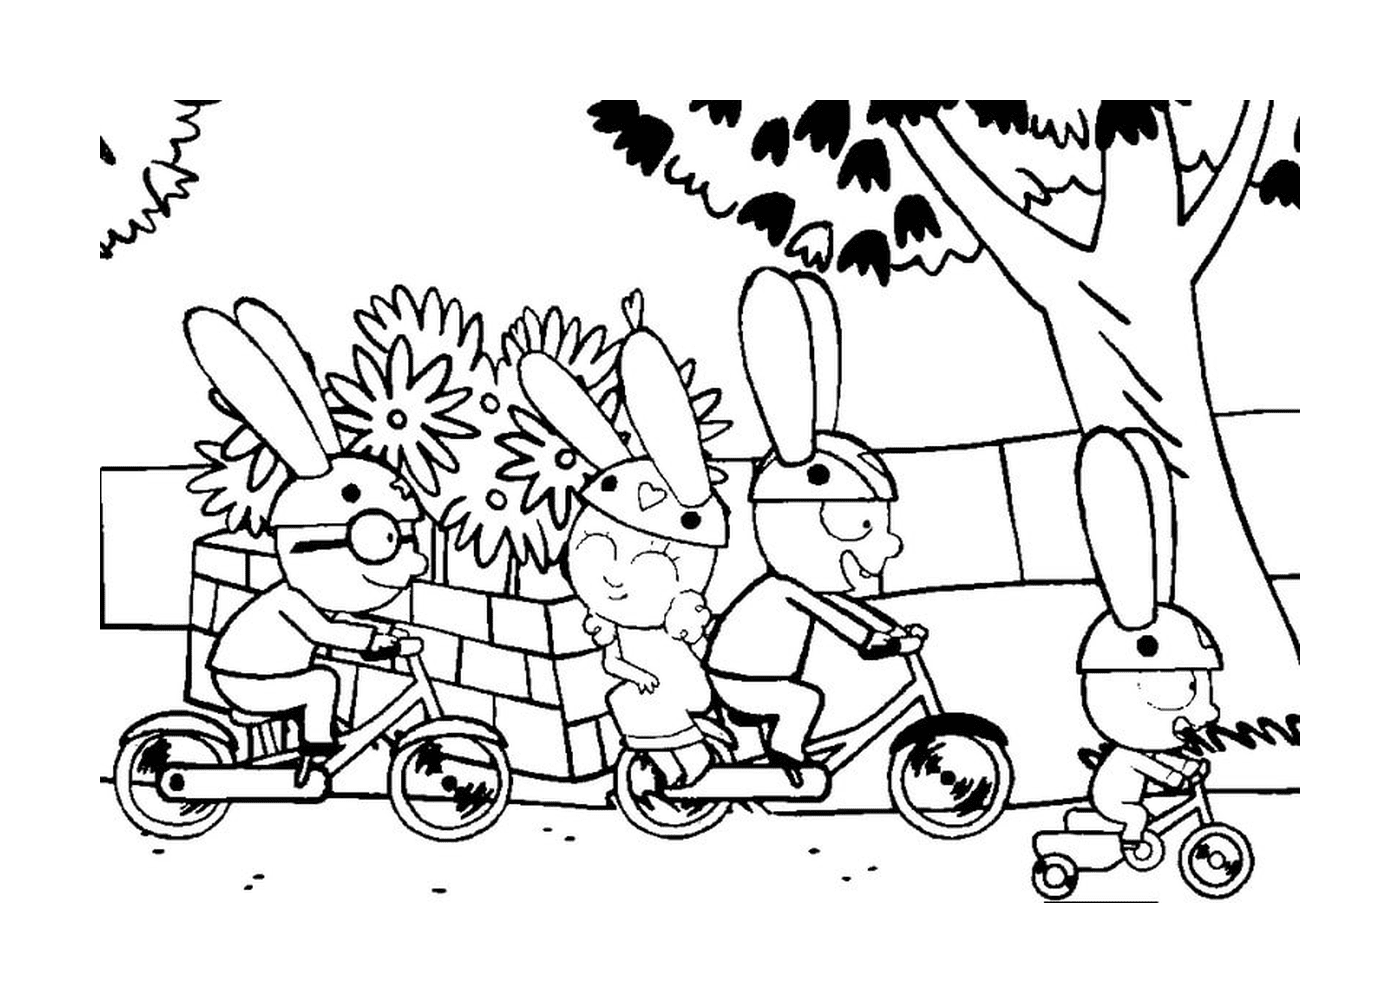  Simon and his friends by bike 